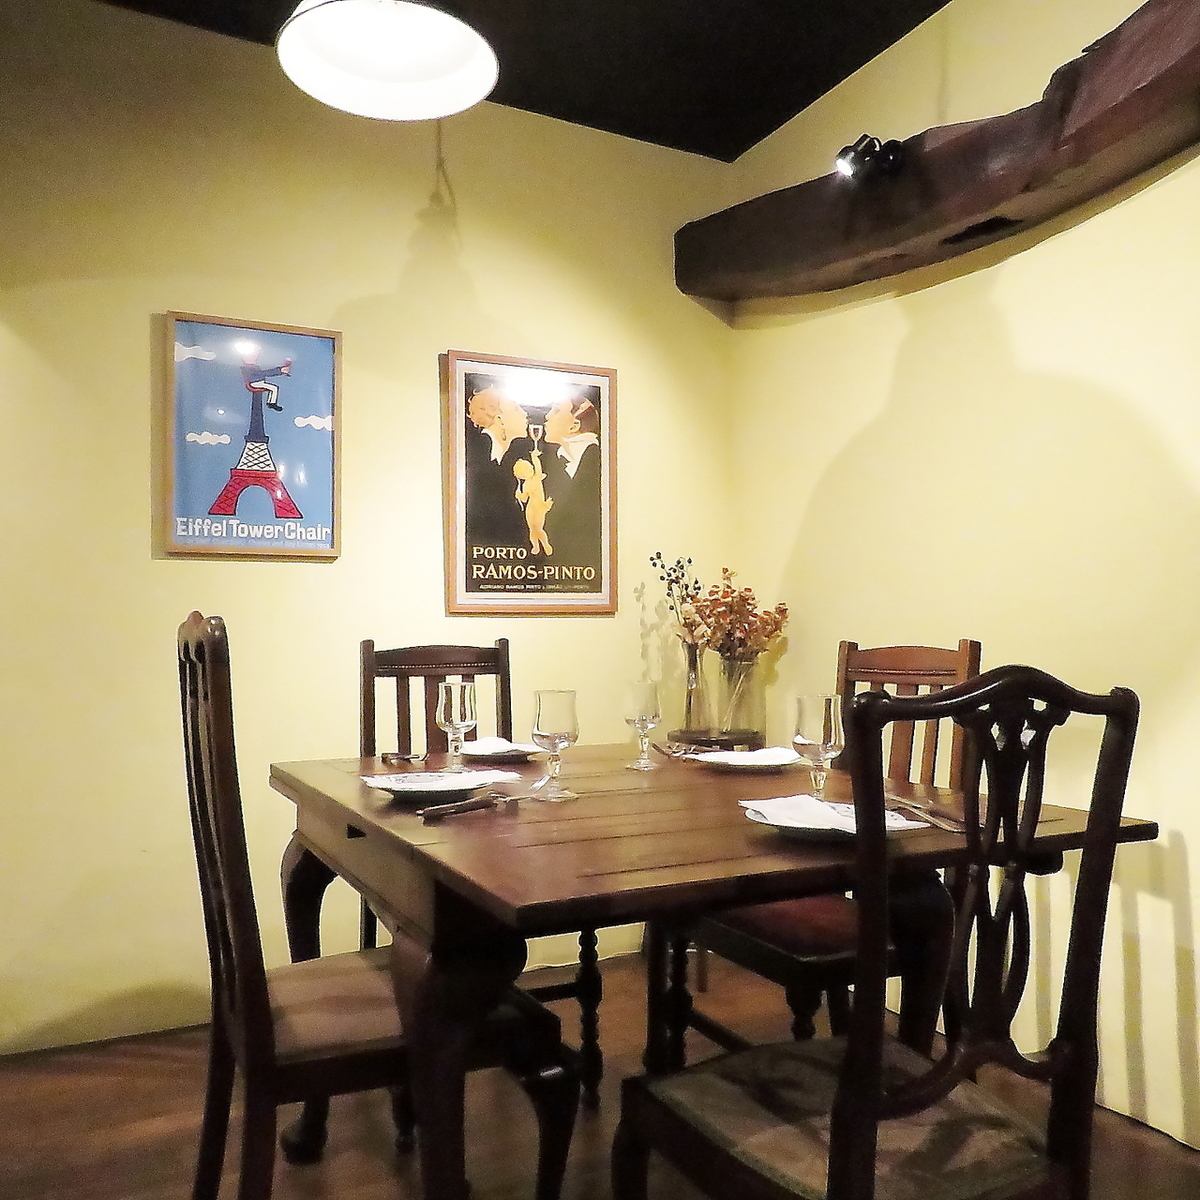 We also have private rooms that are ideal for dates and anniversaries!